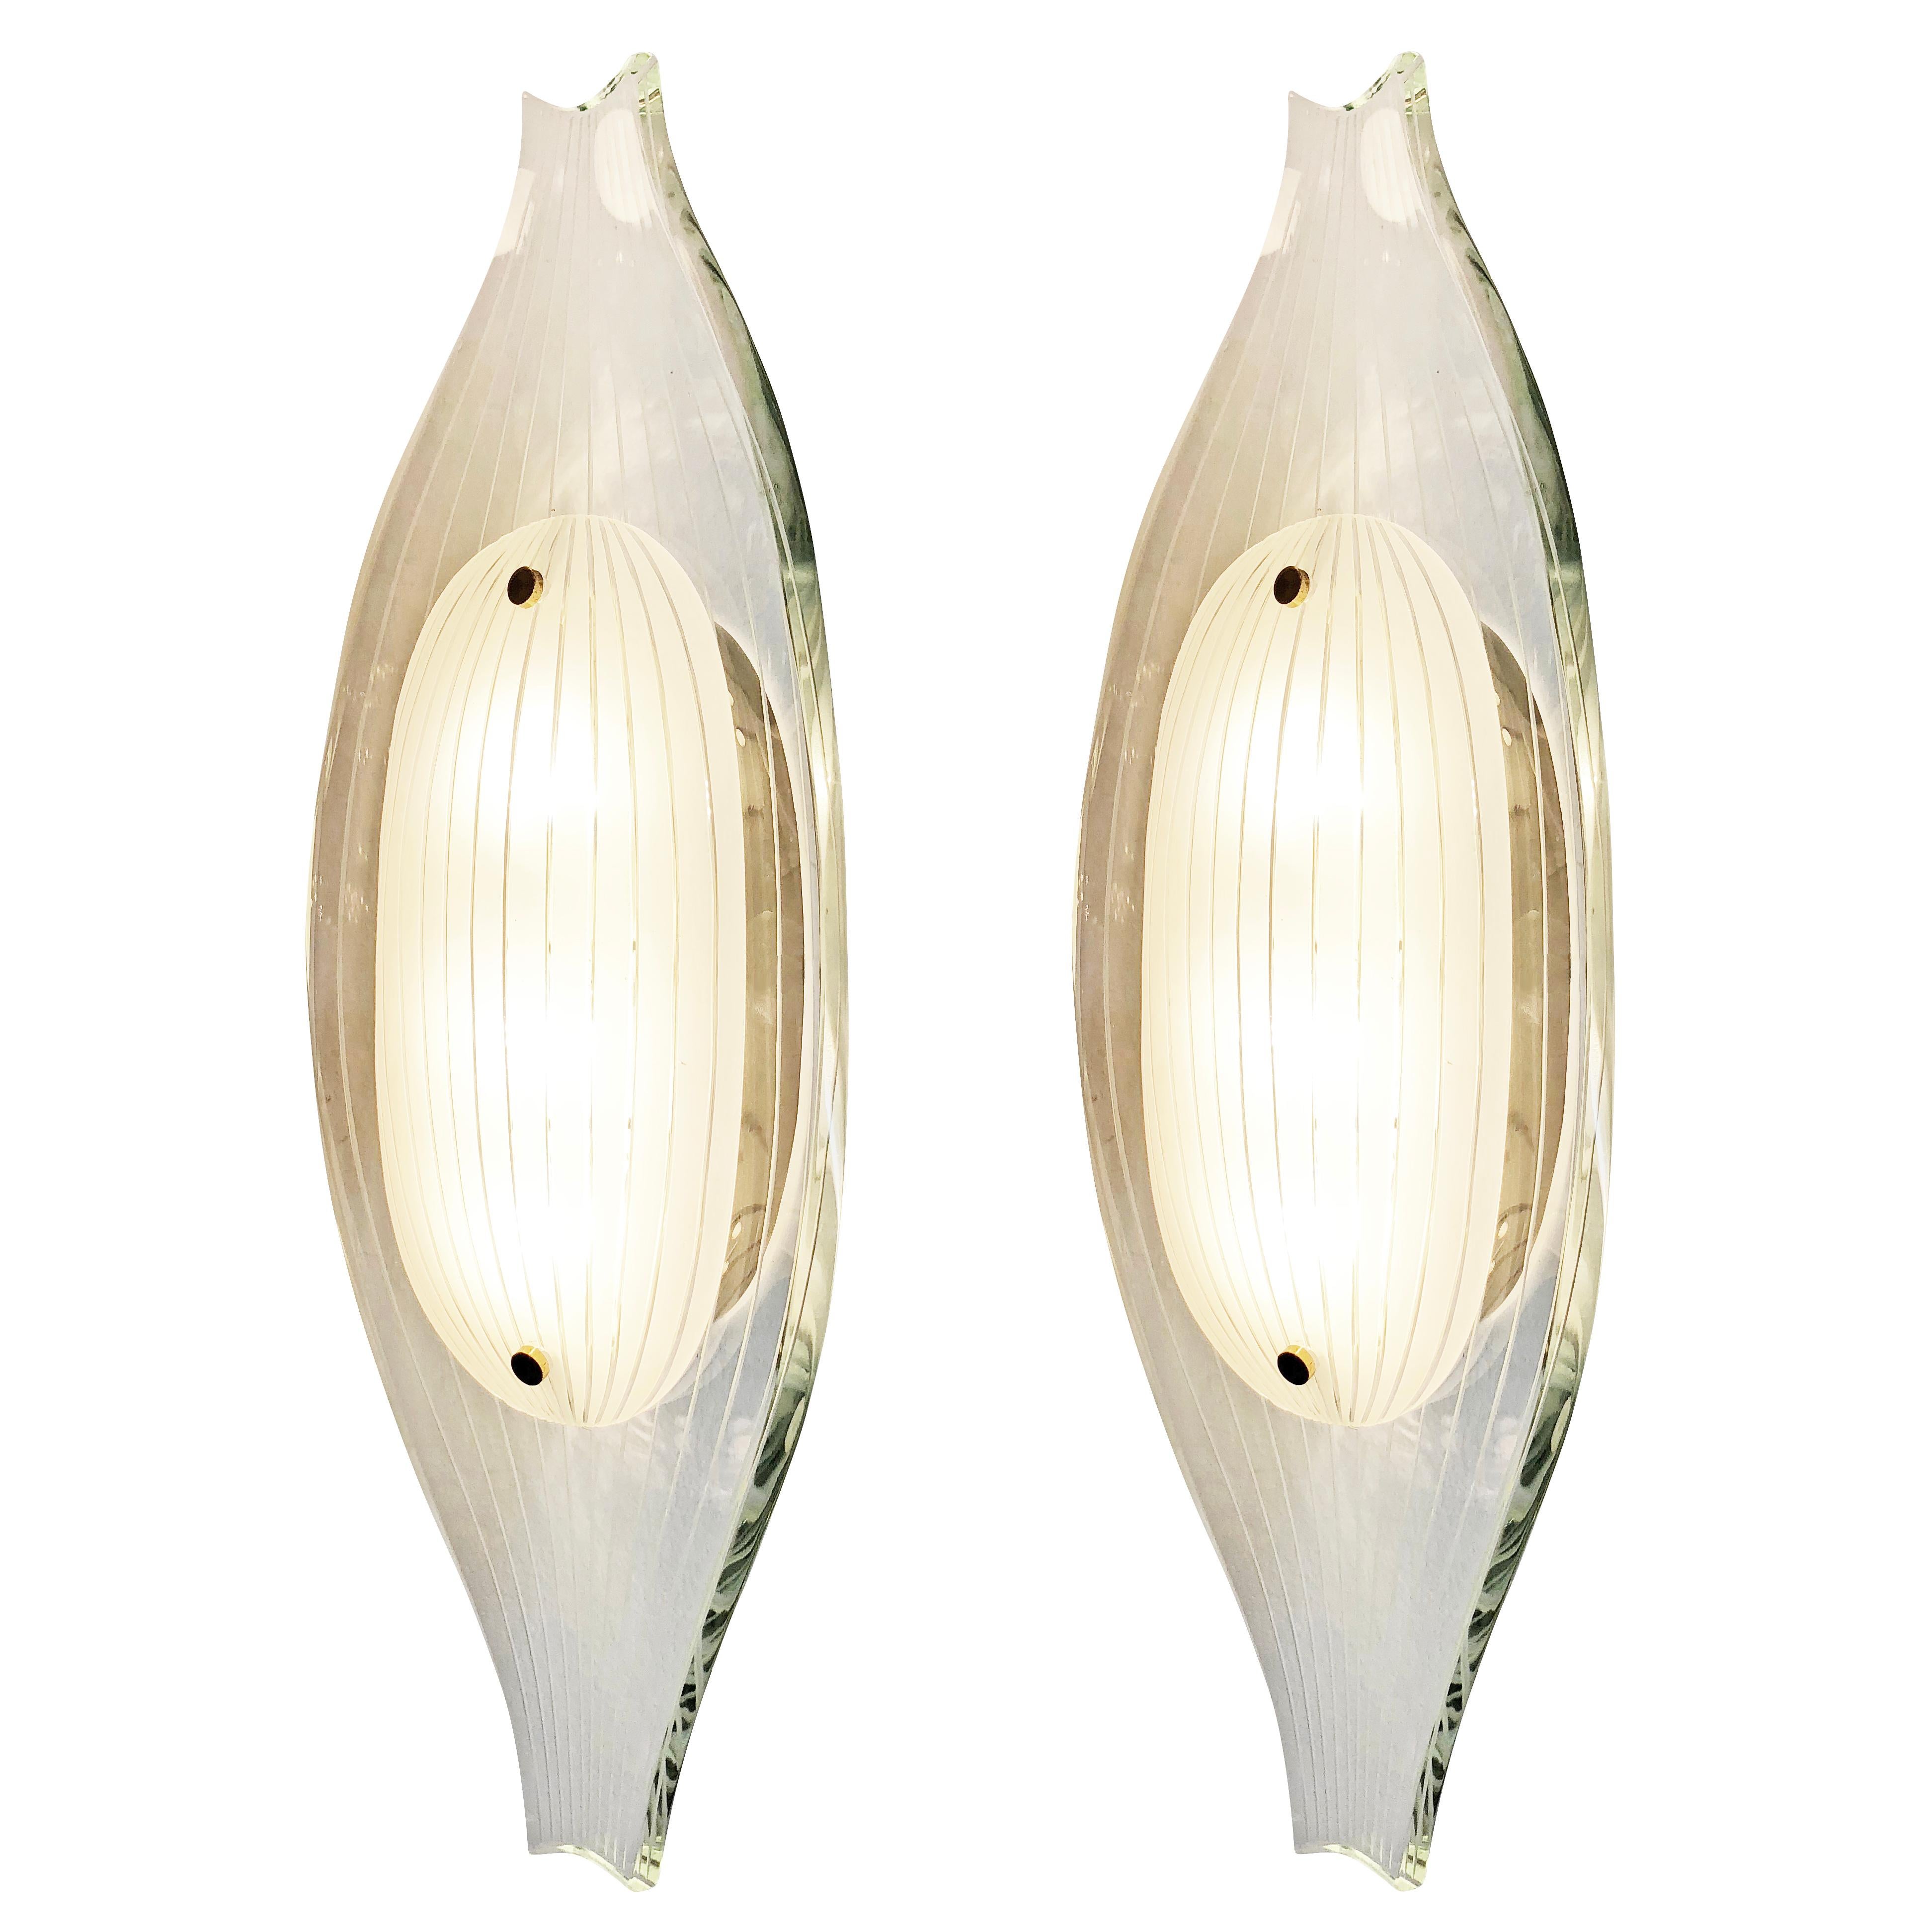 Fontana Arte wall lights model 2340 deigned by Max Ingrand in the 1960s. Each one is composed of a thick hand polished glass with on top a white oval glass. Both glasses have thin etched lines the follow the sloping shape of the fixture. Hardware is